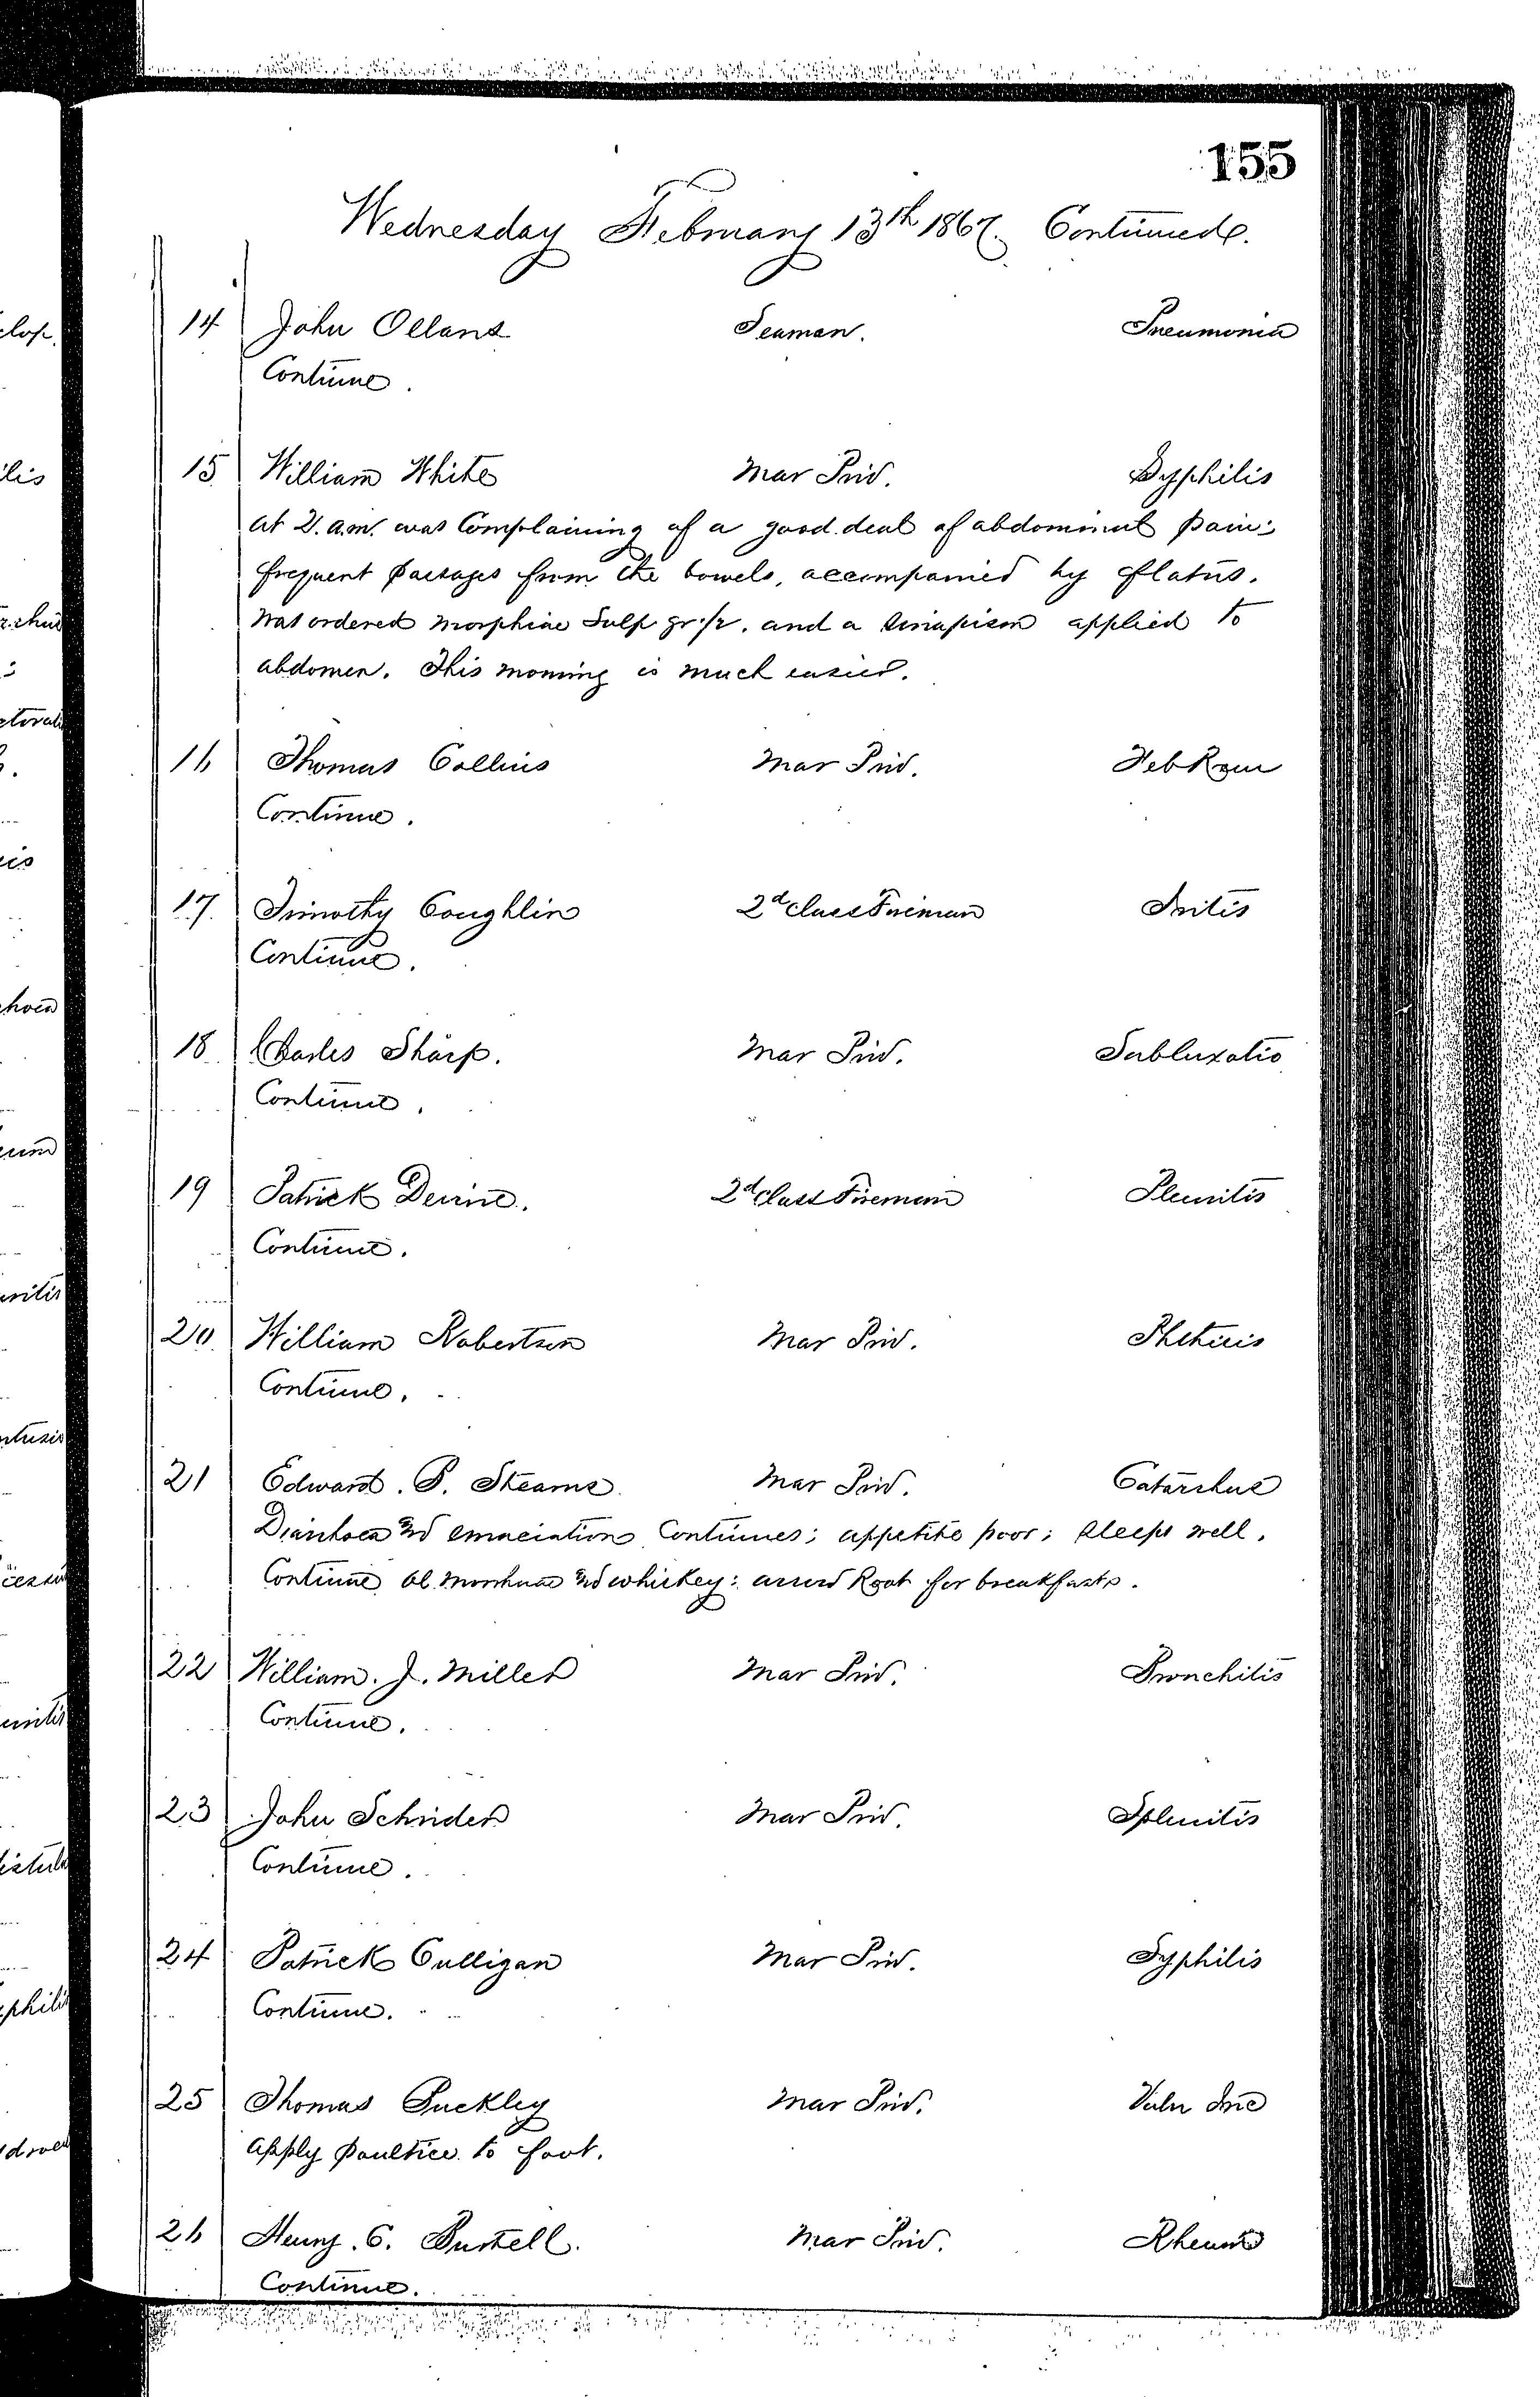 Patients in the Naval Hospital, Washington DC, on February 13, 1867 - Page 2 of 4, in the Medical Journal, October 1, 1866 to March 20, 1867